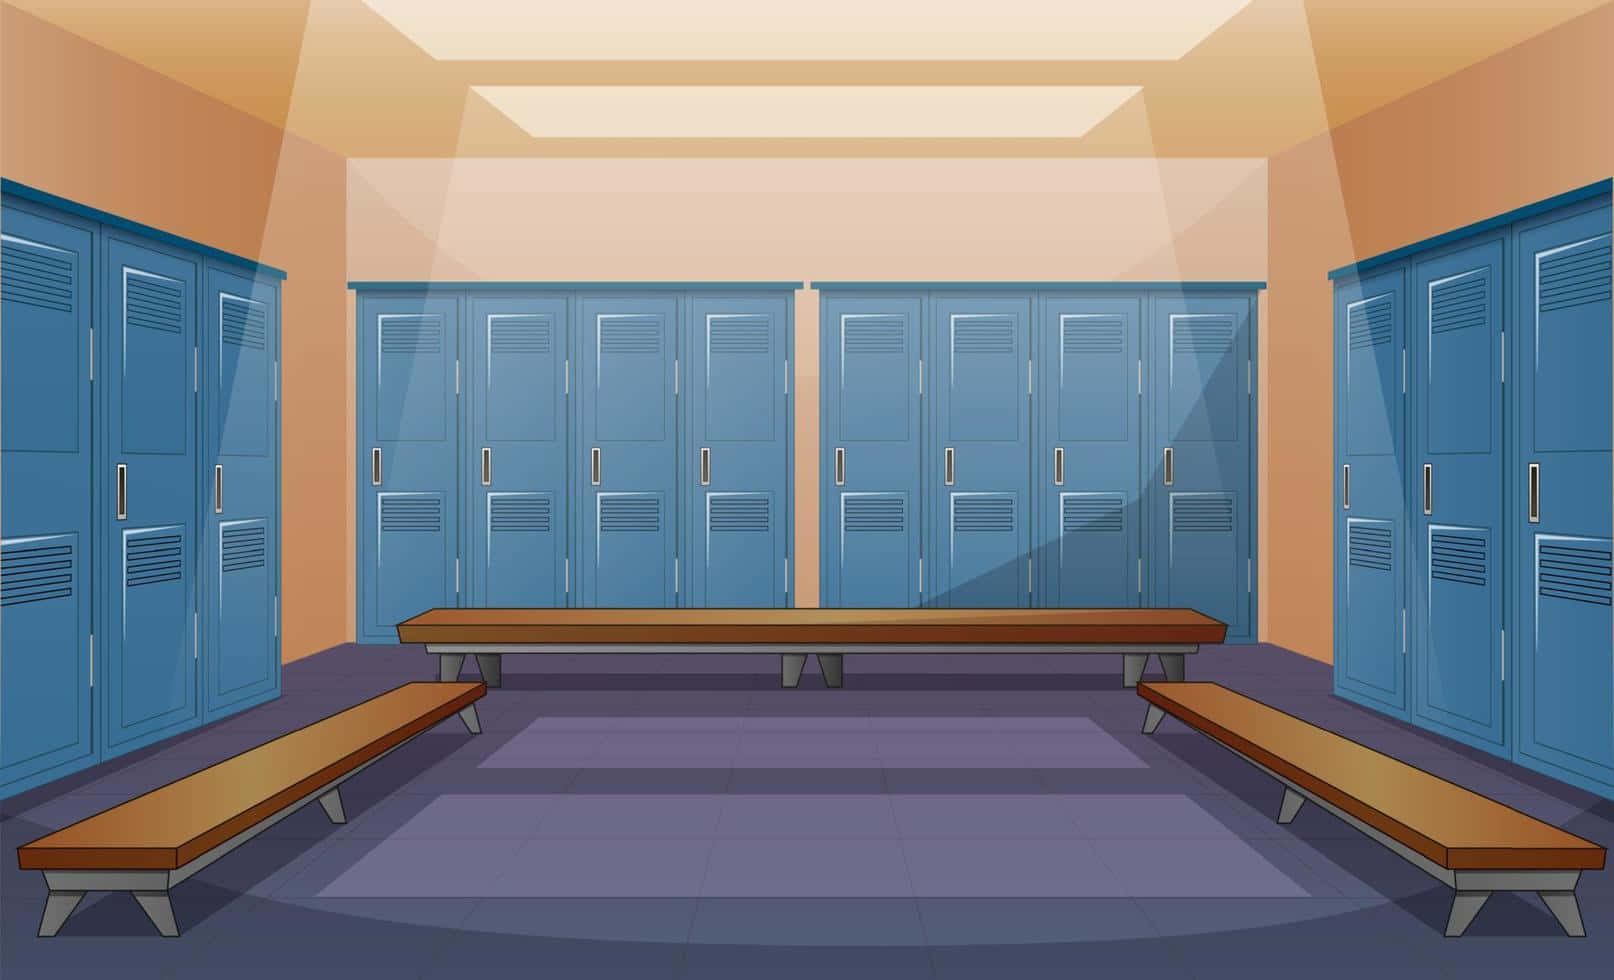 A Locker Room With Benches And Lockers